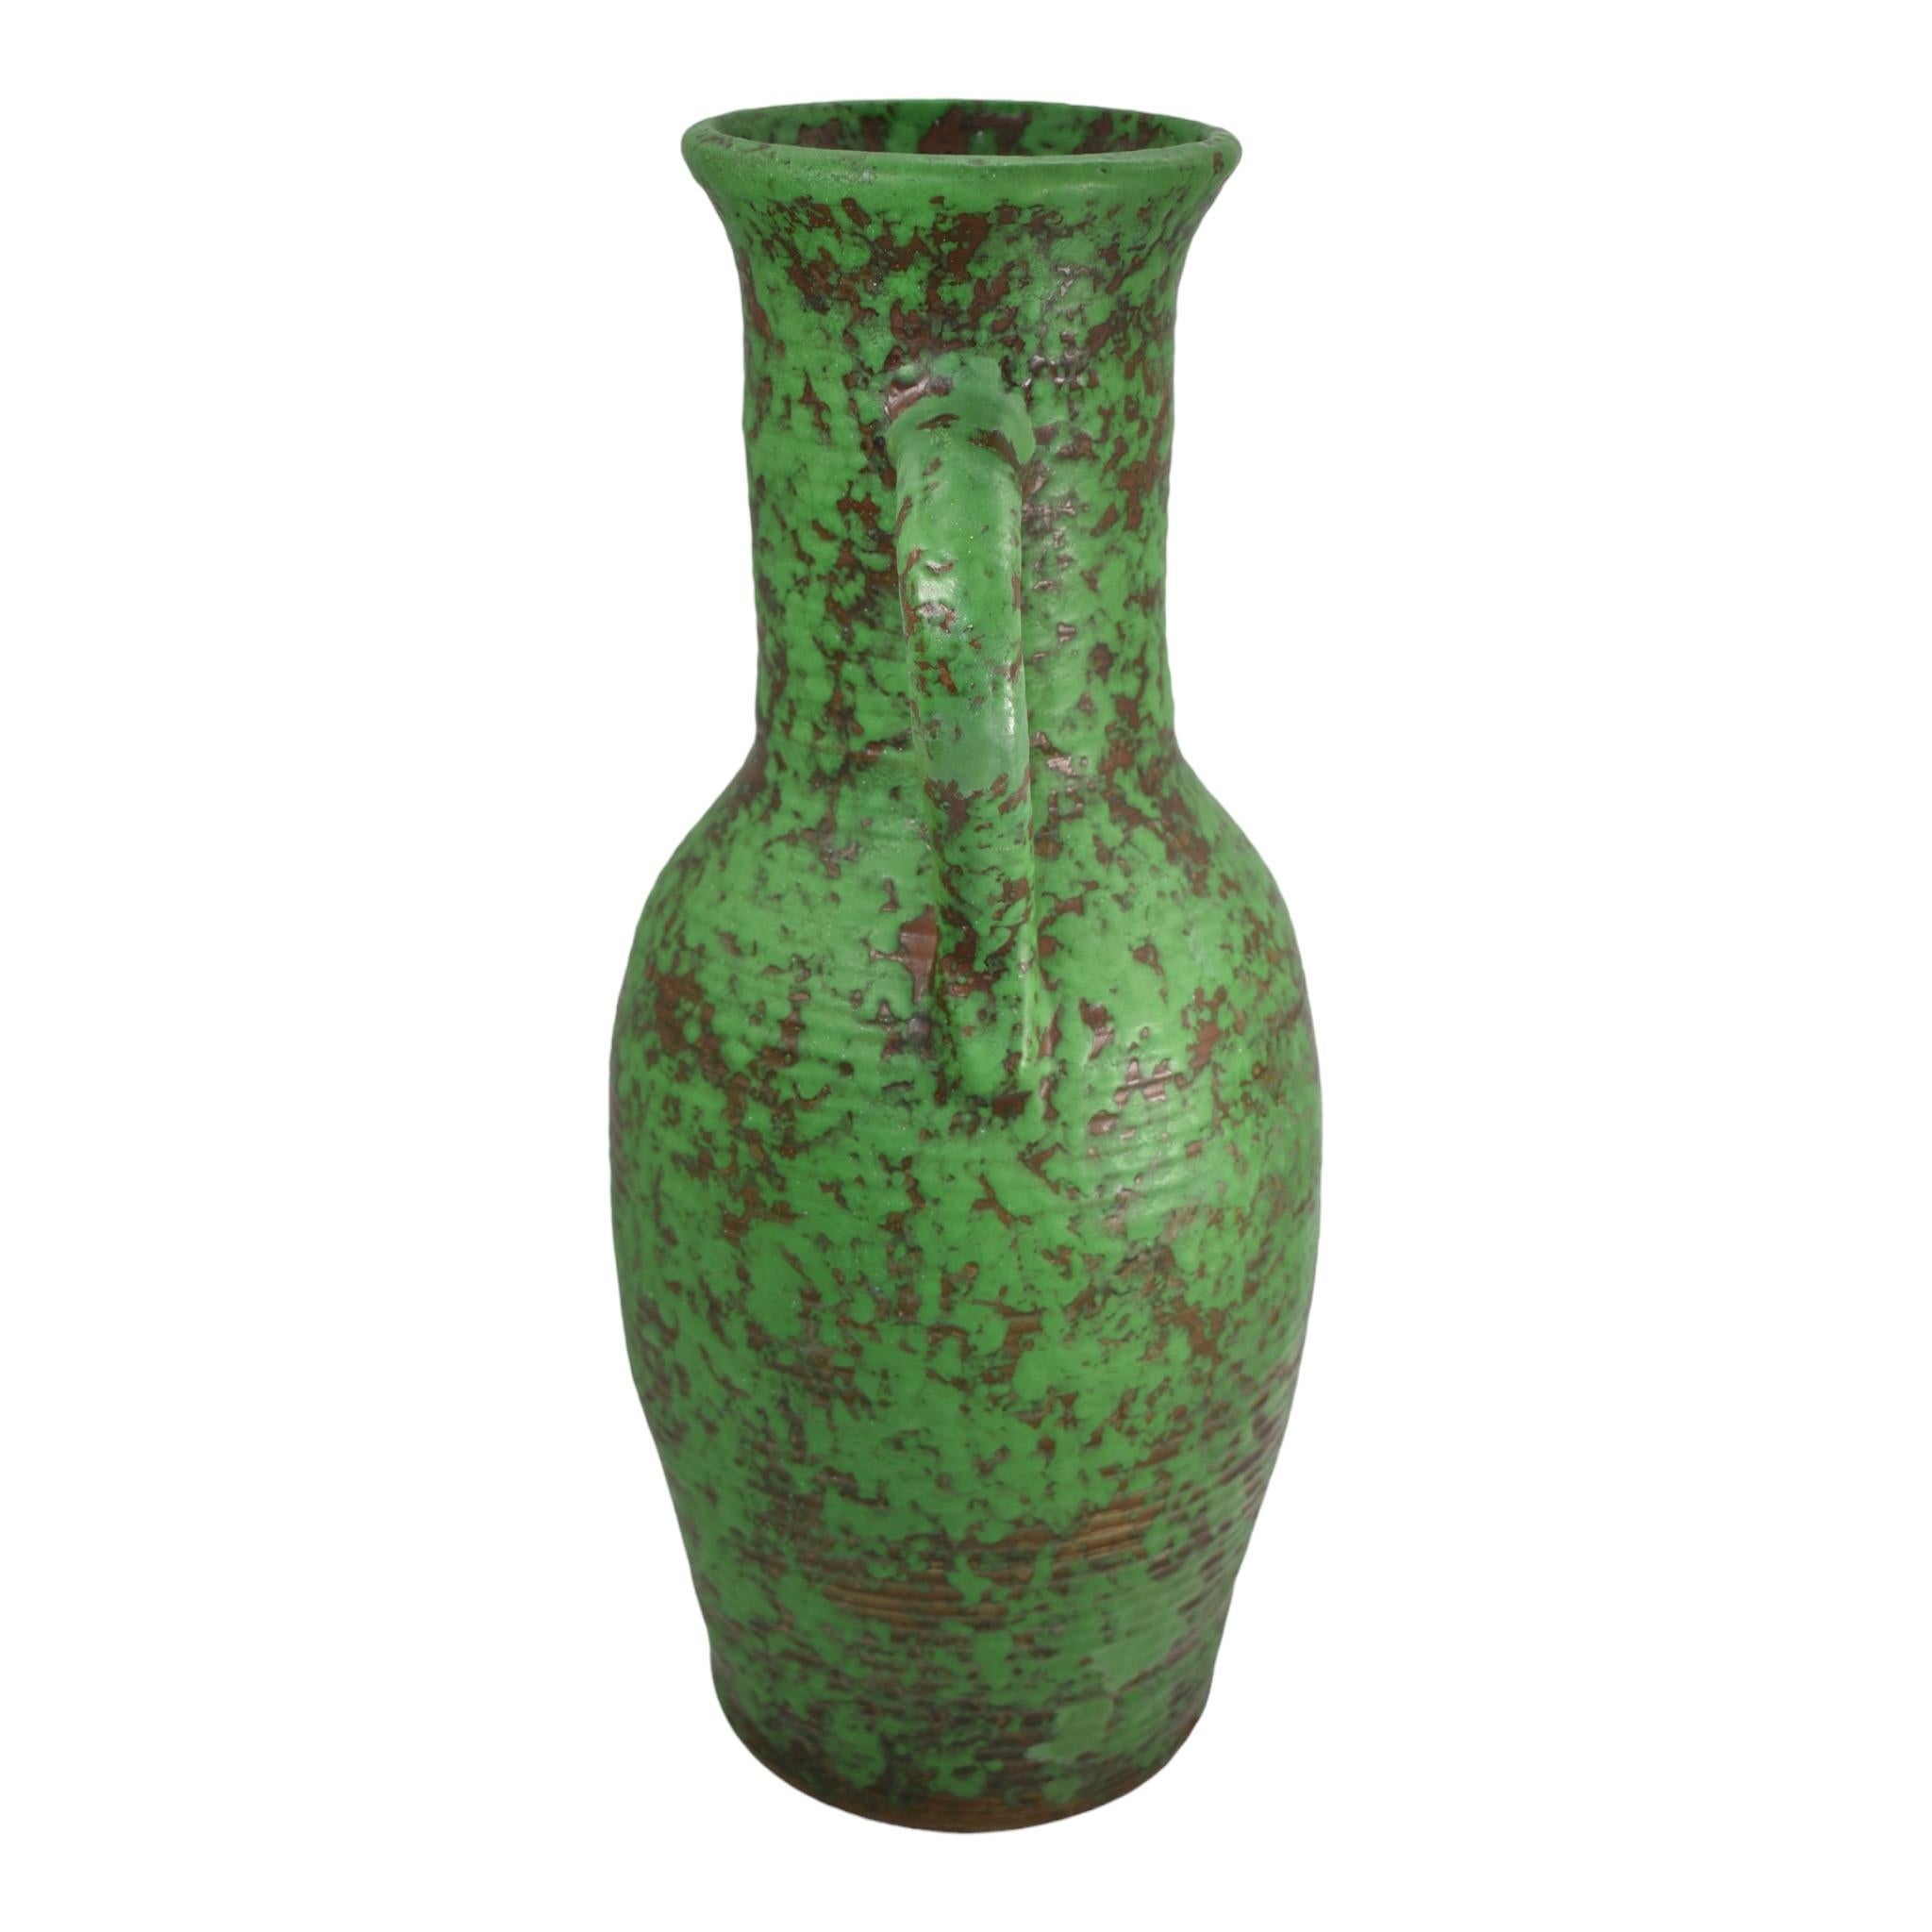 Weller Coppertone 1920s Vintage Arts and Crafts Pottery Green Ceramic Floor Vase
Massive hand thrown arts and crafts ribbed and handled form with super color.
Shows well with a professional non-showing restoration to the body. No other chips,